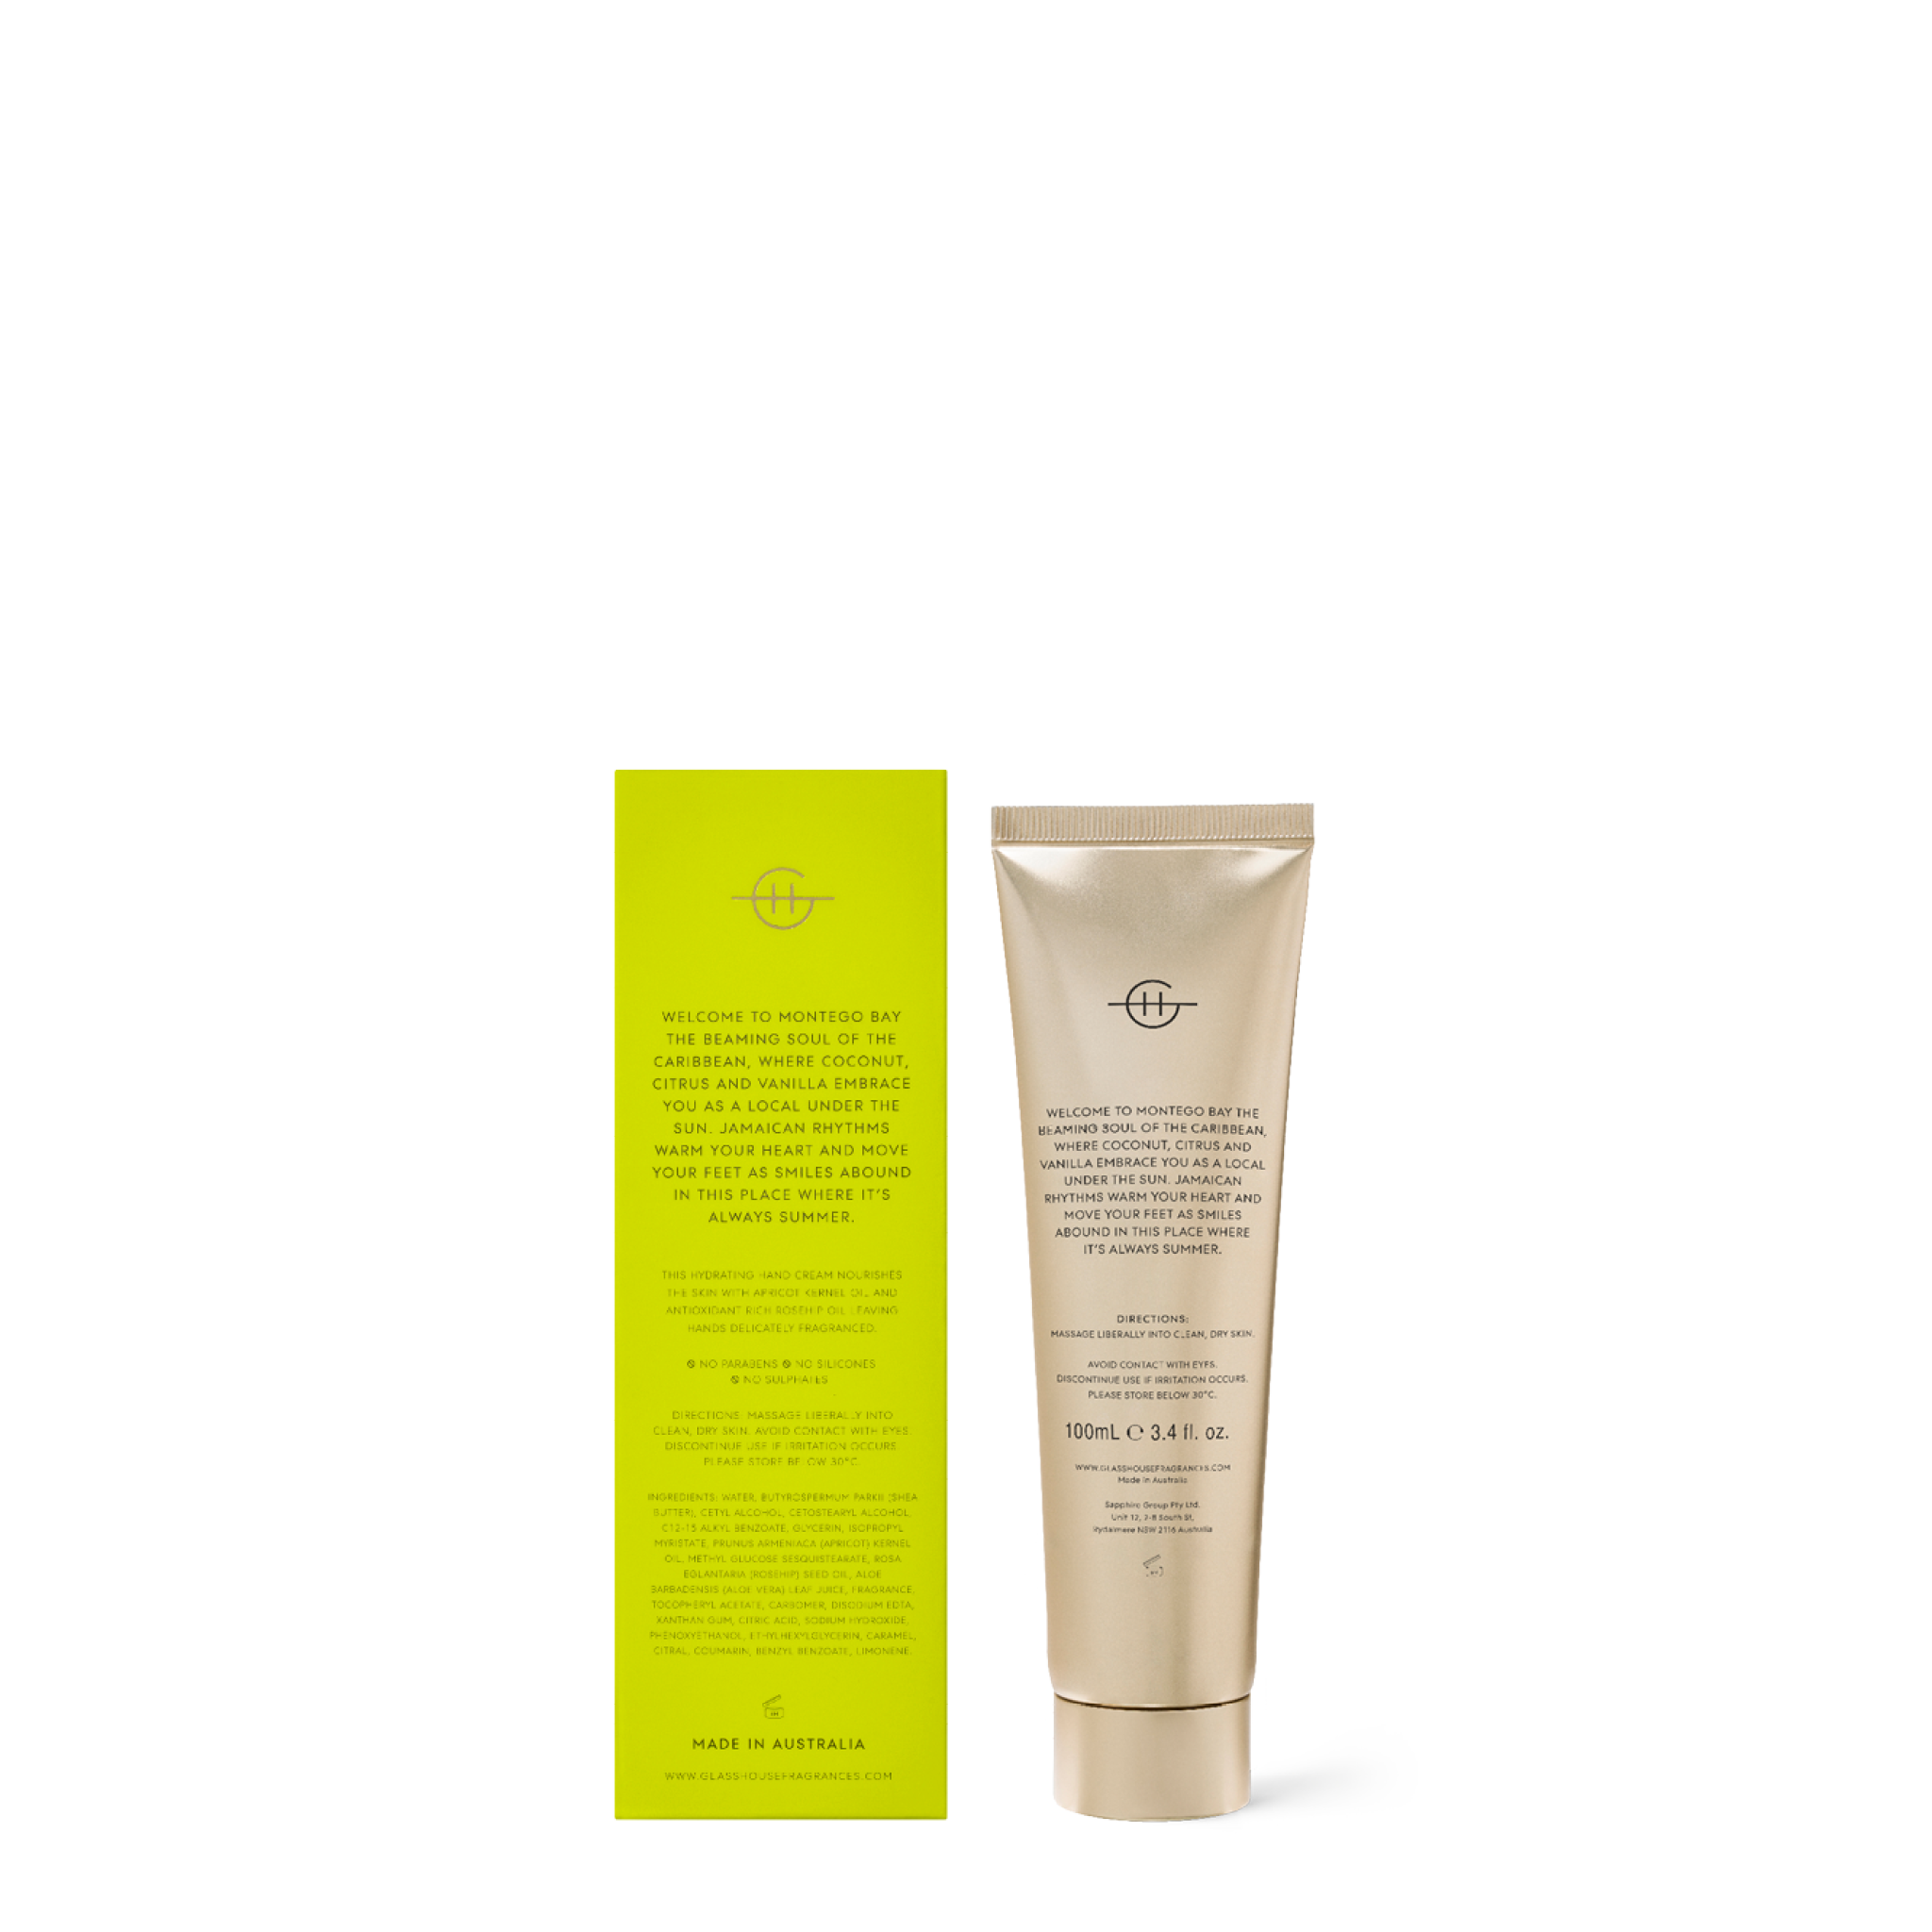 Glasshouse Fragrances Montego Bay Rhythm Coconut and Lime 100mL Hand Cream with box - back of product shot